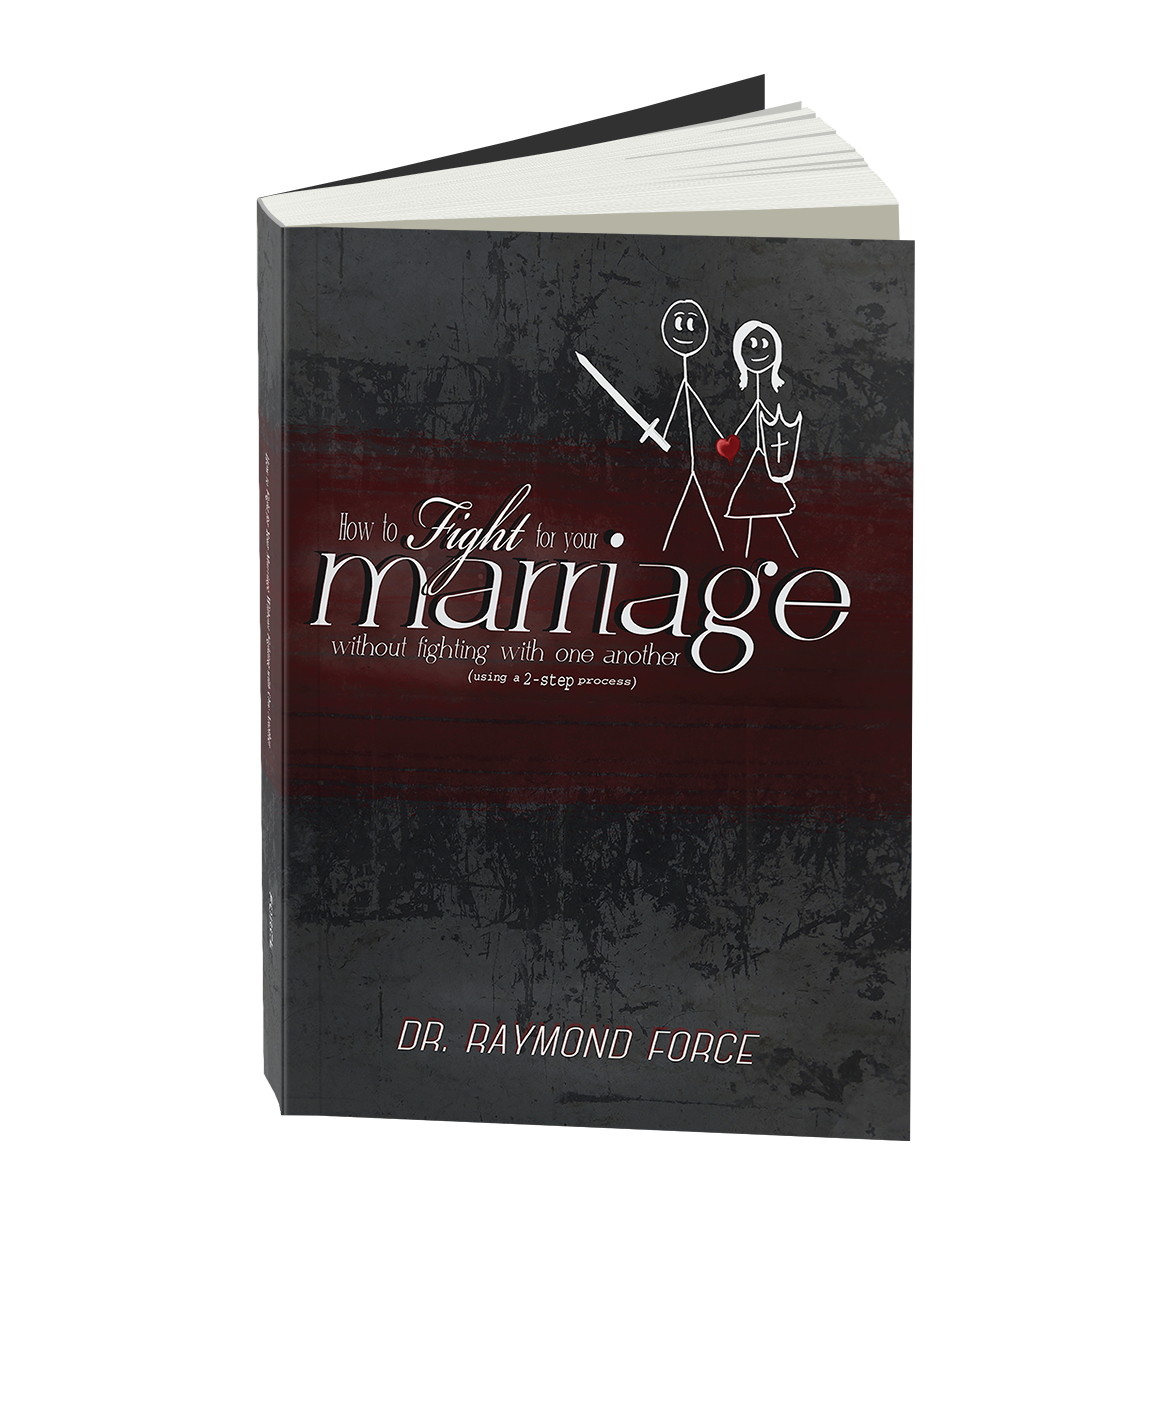 https://hittinghomeministry.com/wp-content/uploads/2021/10/Marriage-Book-Cover.png